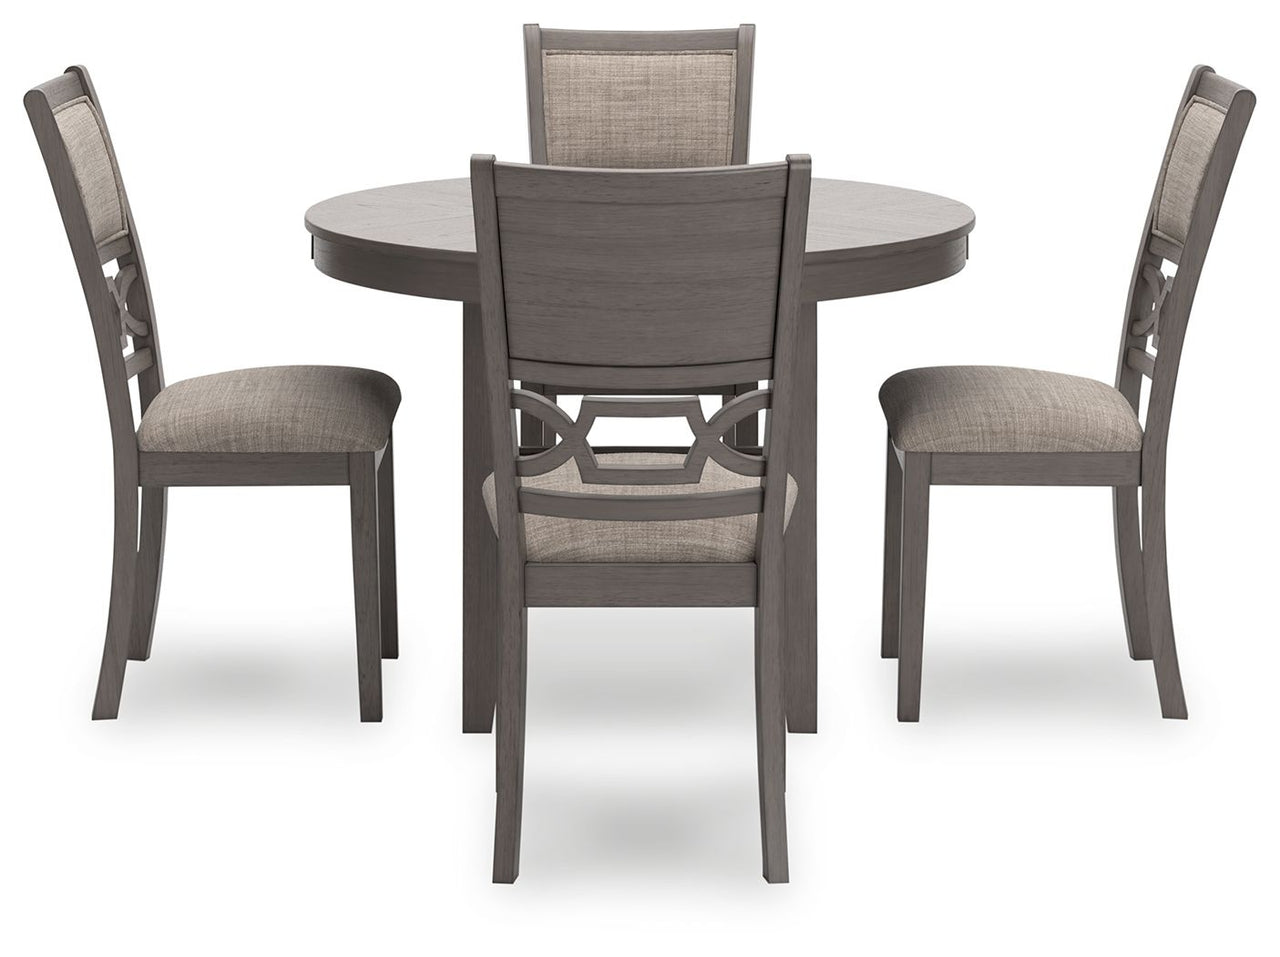 Wrenning - Gray - Dining Room Table Set (Set of 5) - Tony's Home Furnishings